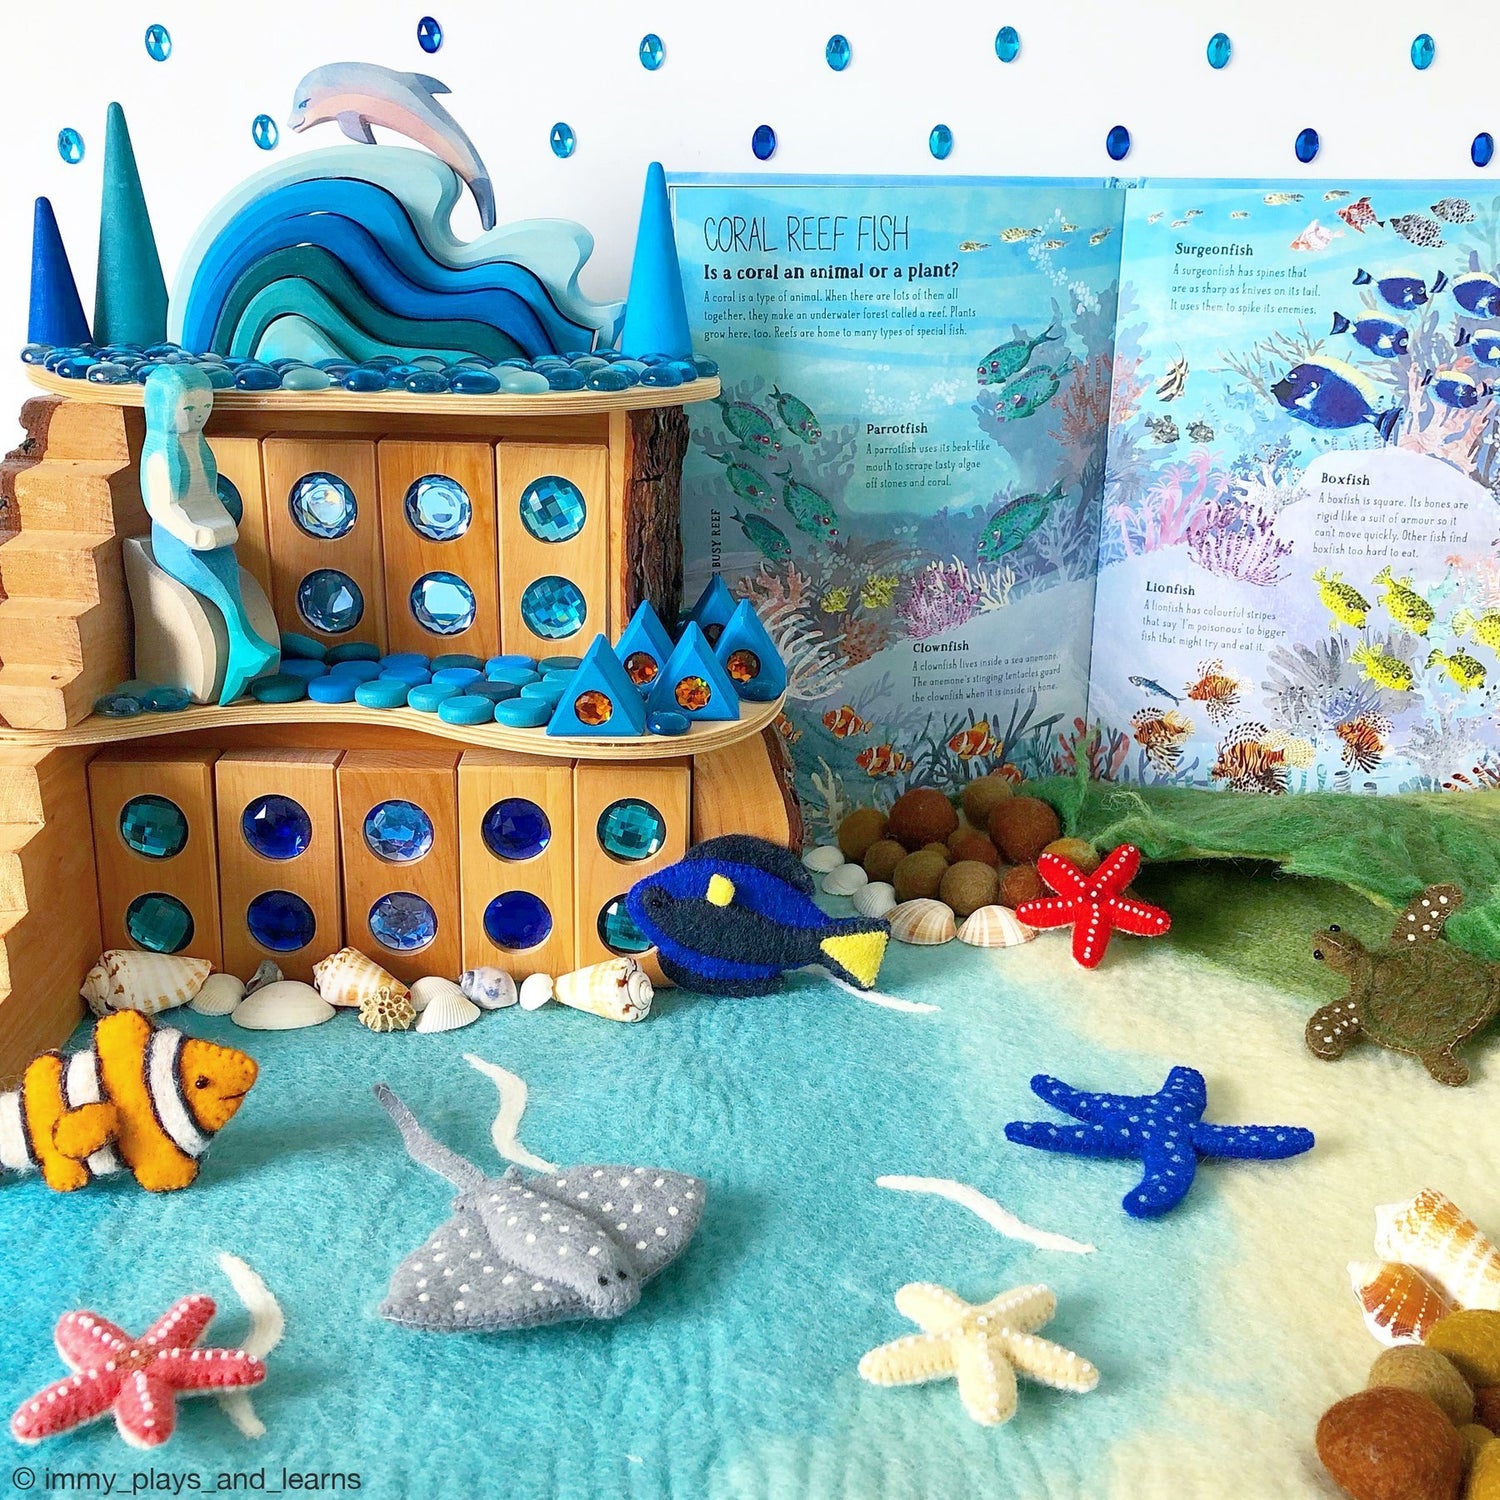 LARGE SEA AND ROCKPOOL PLAY MAT PLAYSCAPE by TARA TREASURES - The Playful Collective